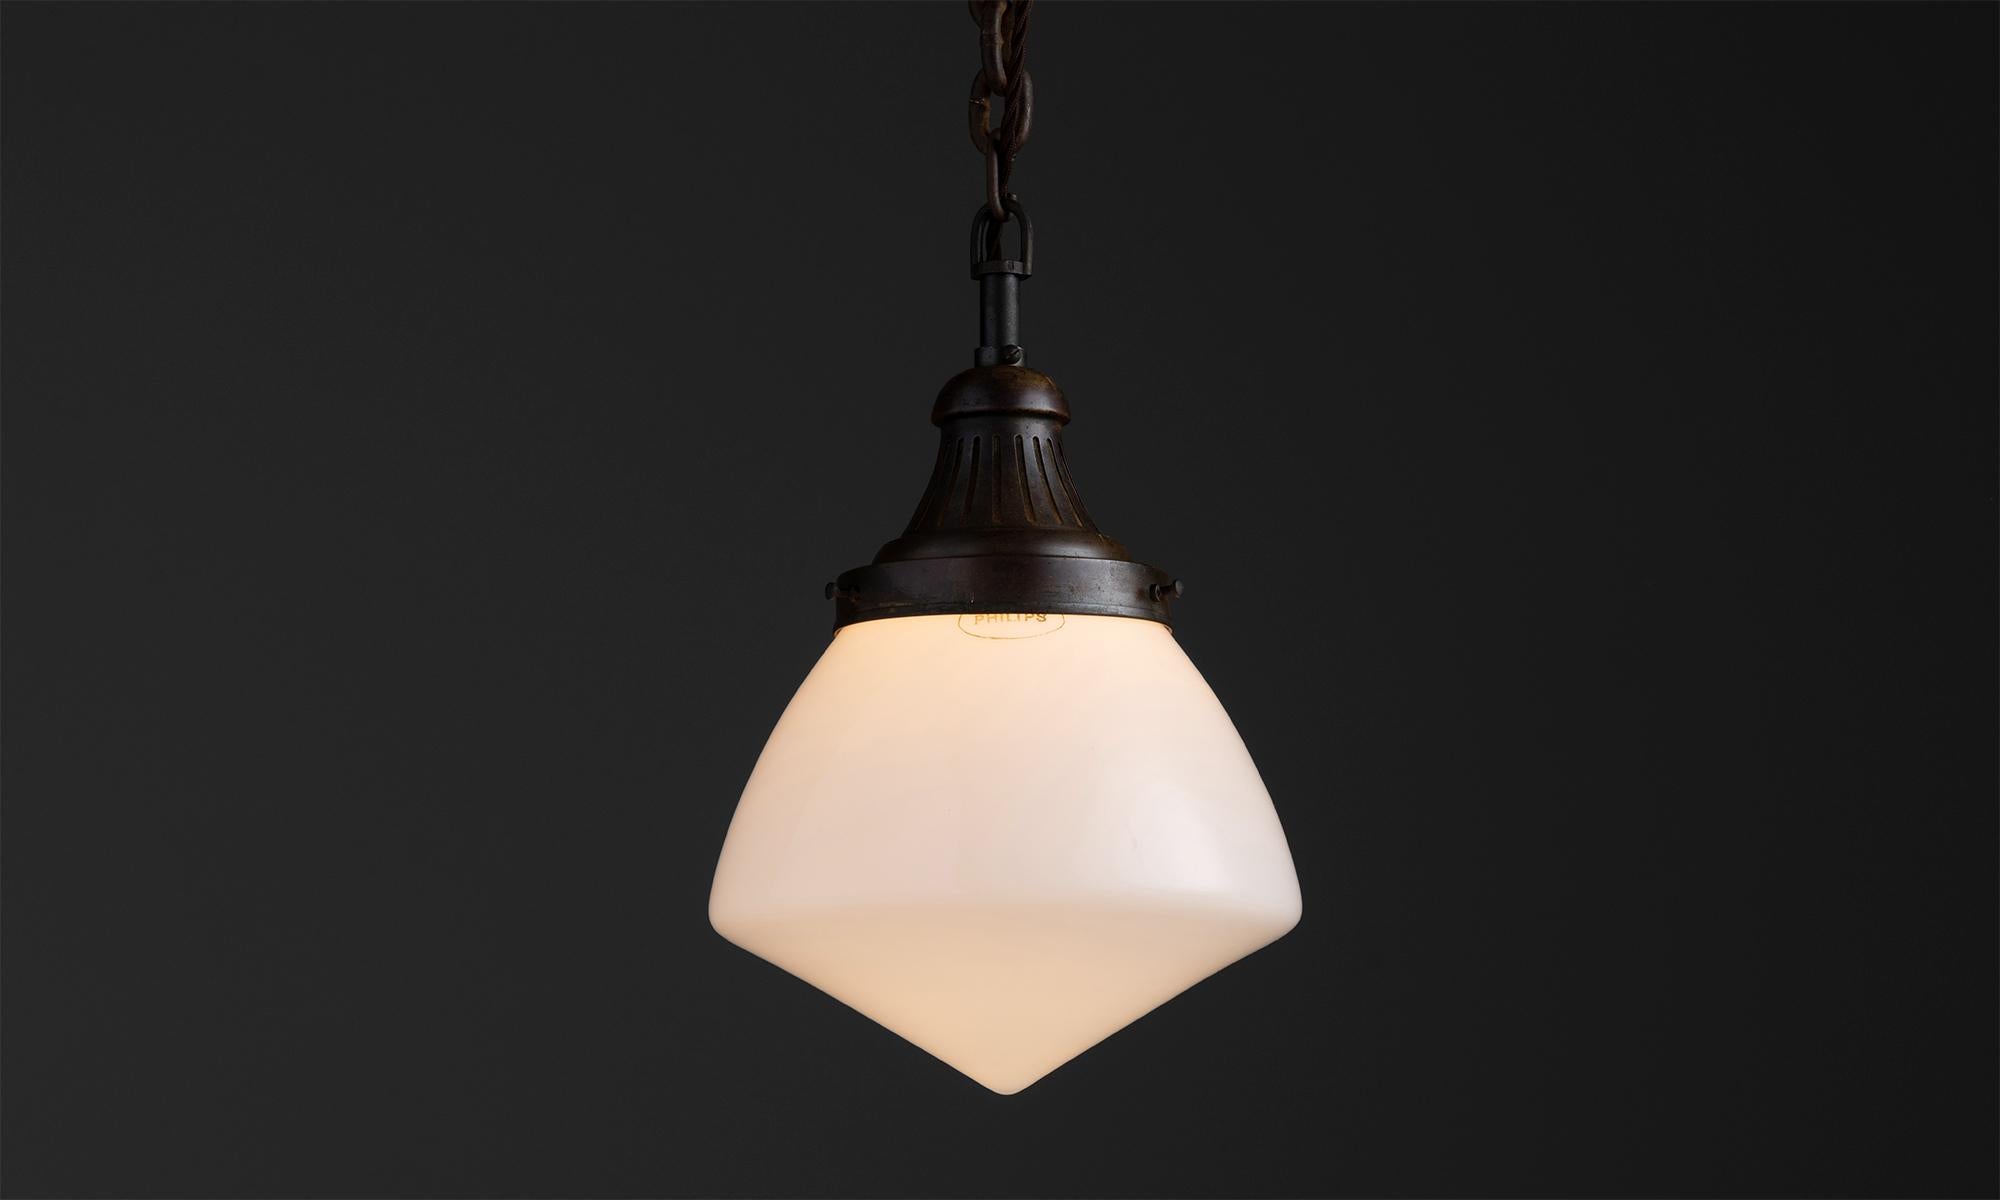 Opaline Pendant by Philips

Netherlands, circa 1930

Industrial pendant with opaline glass shade.

Measures 9-1/16